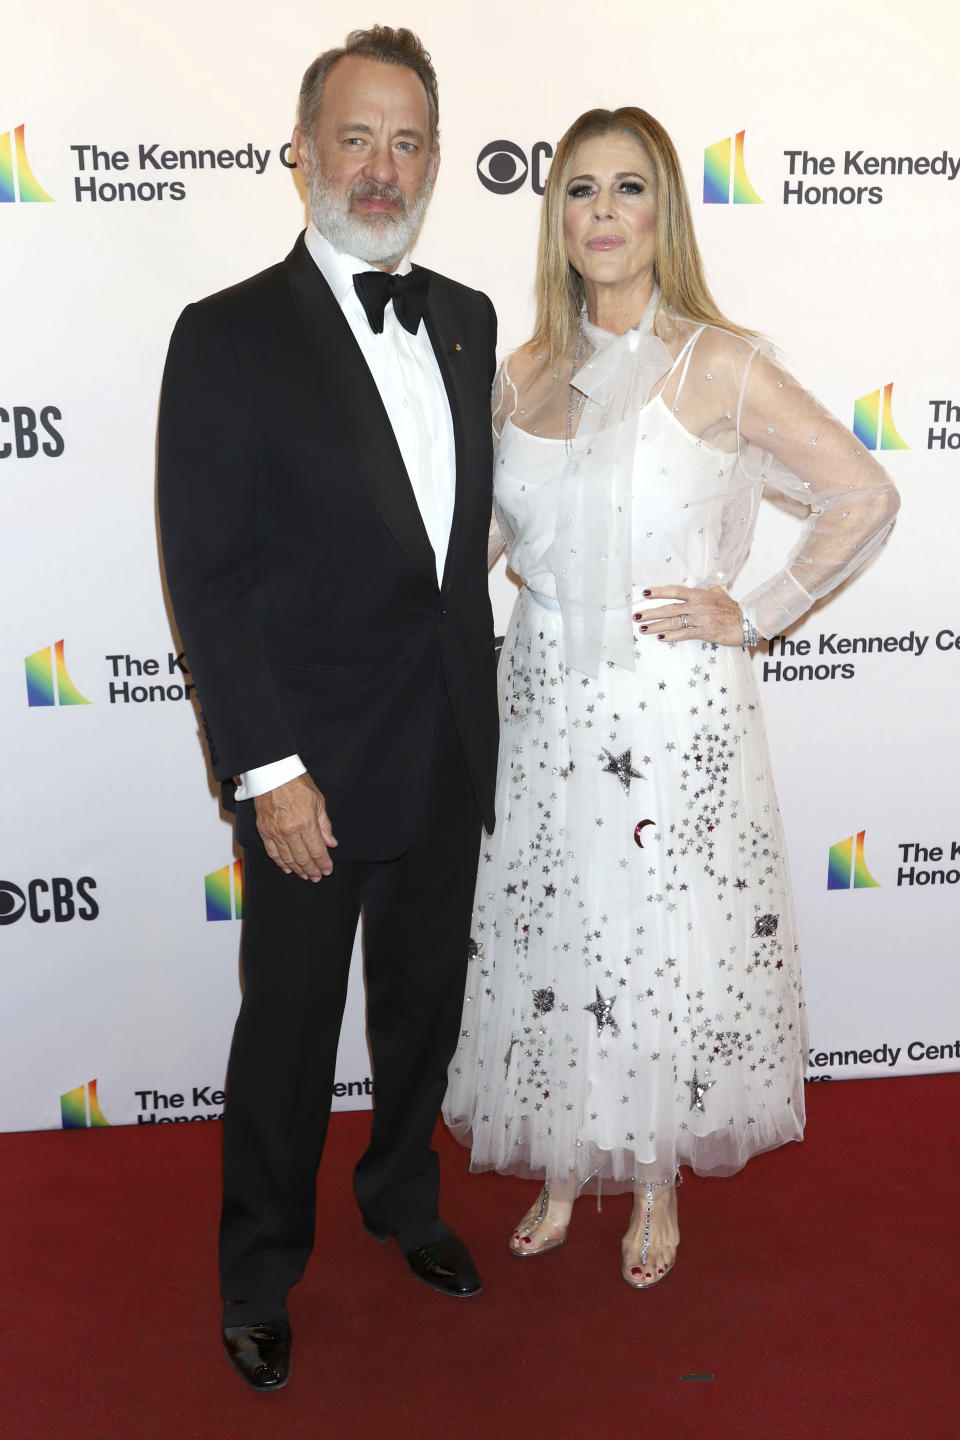 Tom Hanks, left, and Rita Wilson attend the 42nd Annual Kennedy Center Honors at The Kennedy Center on Sunday, Dec. 8, 2019, in Washington. (Photo by Greg Allen/Invision/AP)